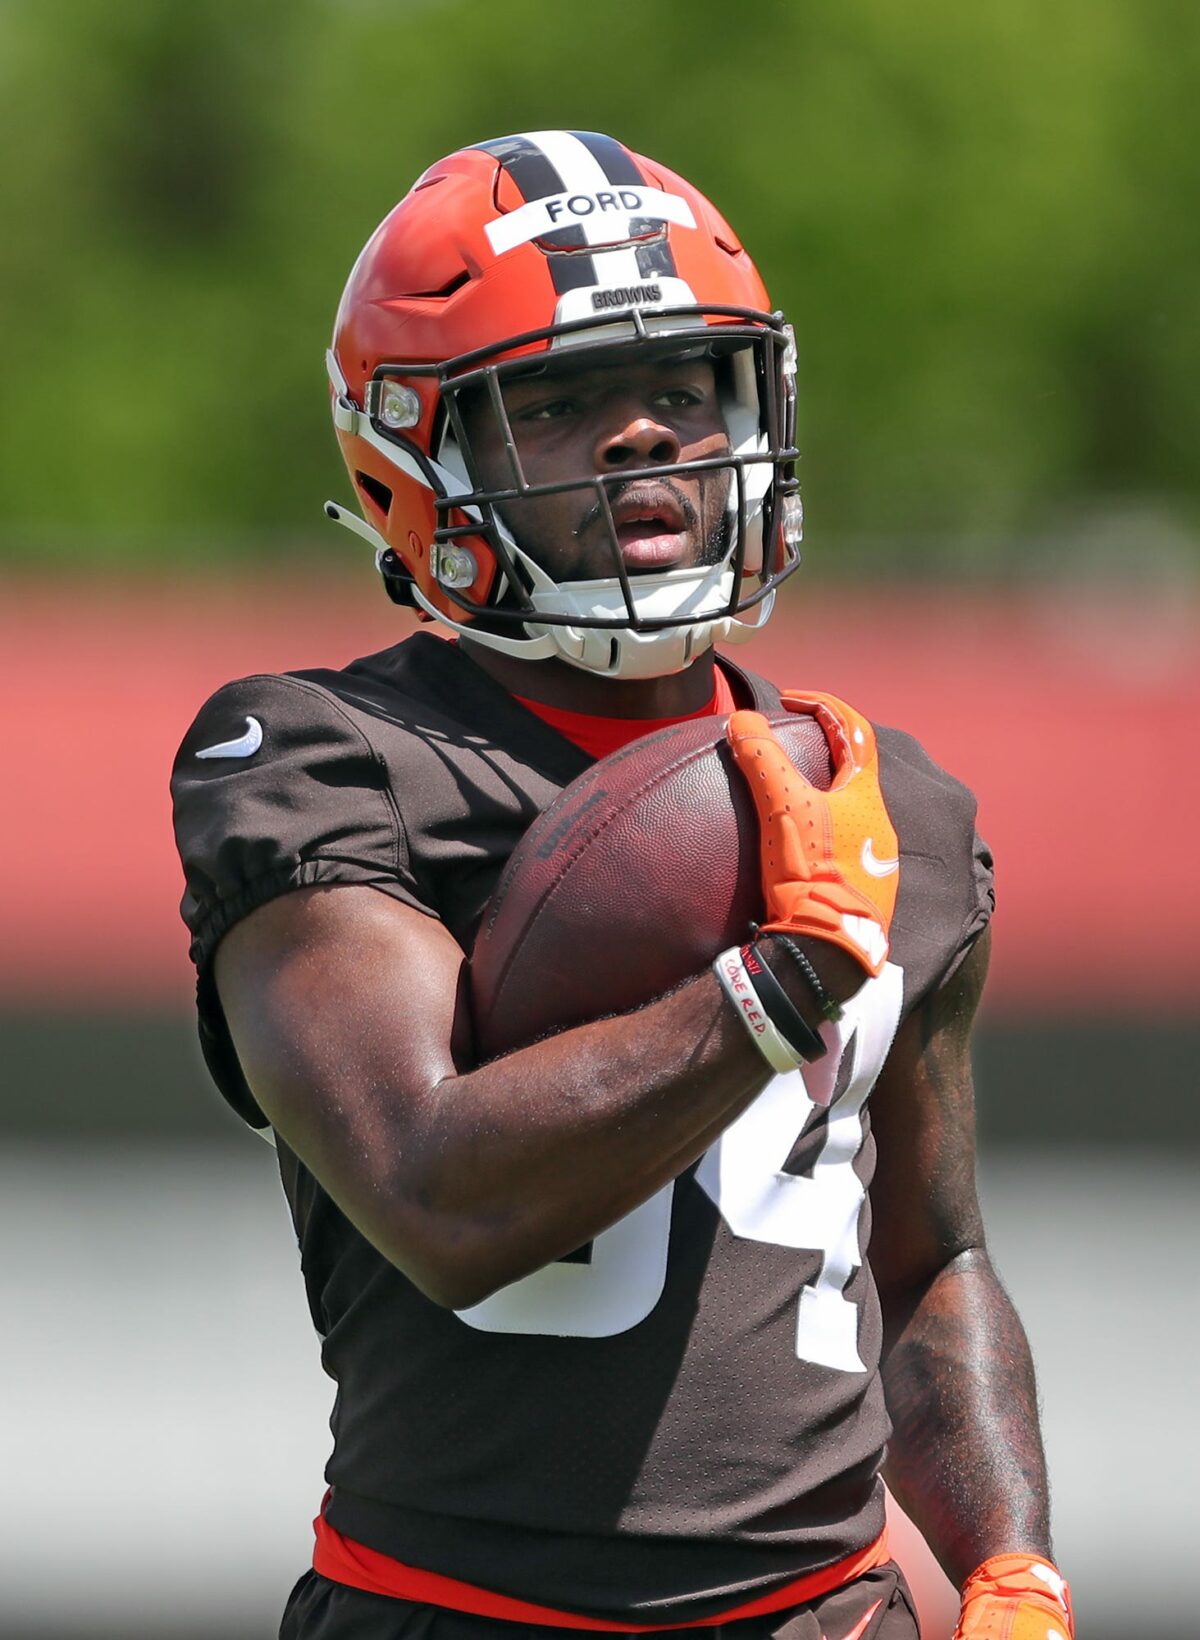 Browns RB coach has high praise for second-year back Jerome Ford